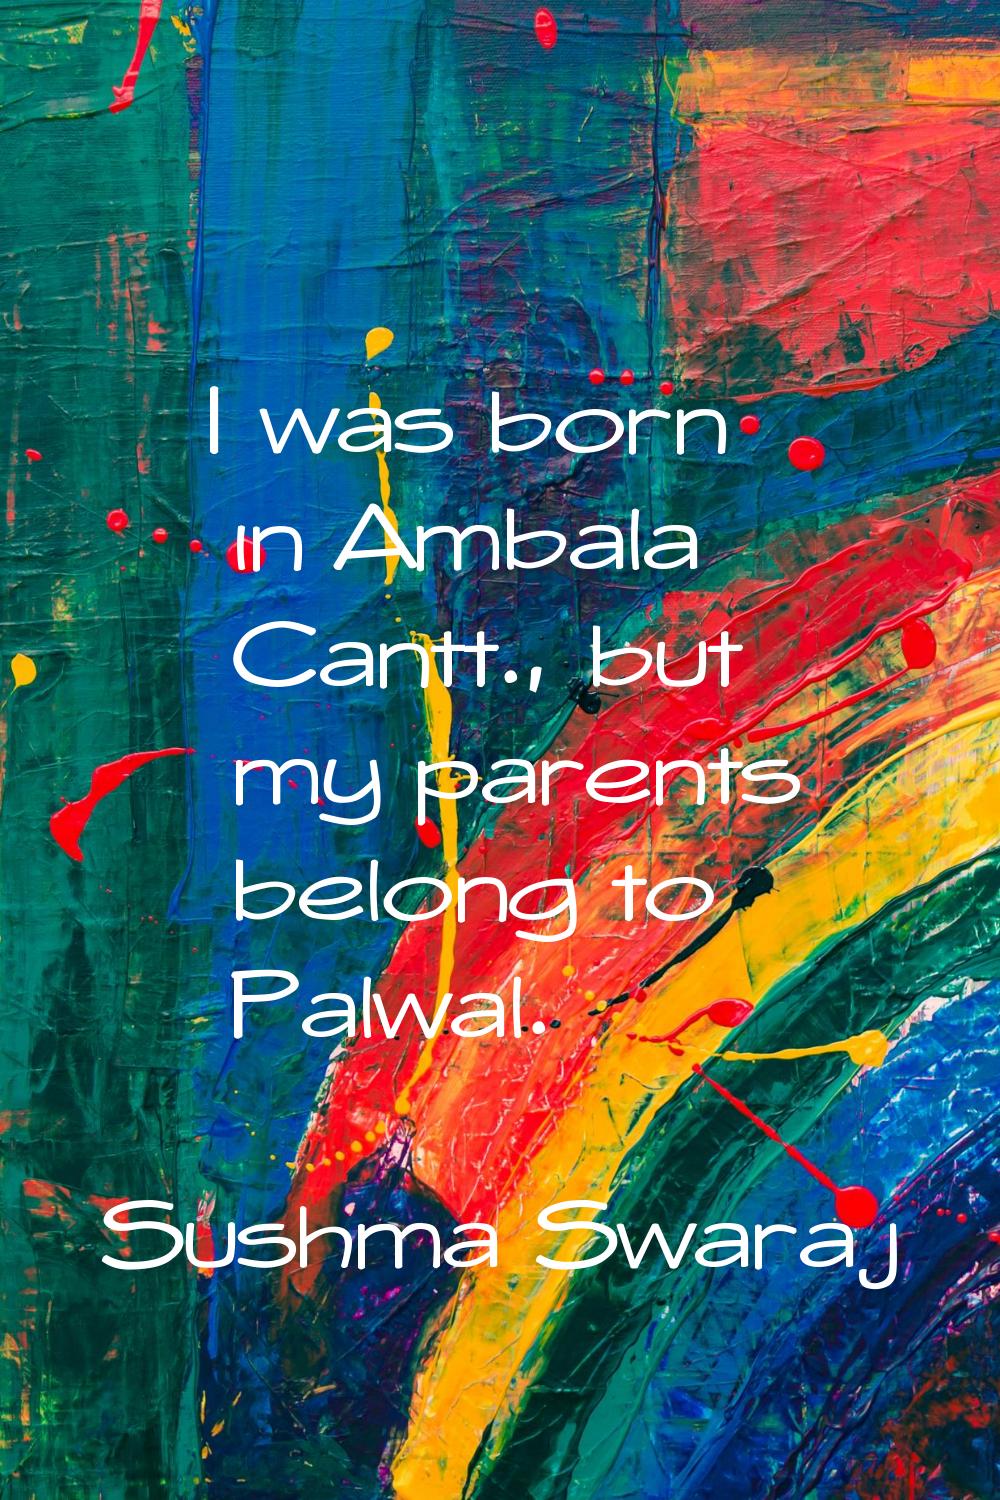 I was born in Ambala Cantt., but my parents belong to Palwal.